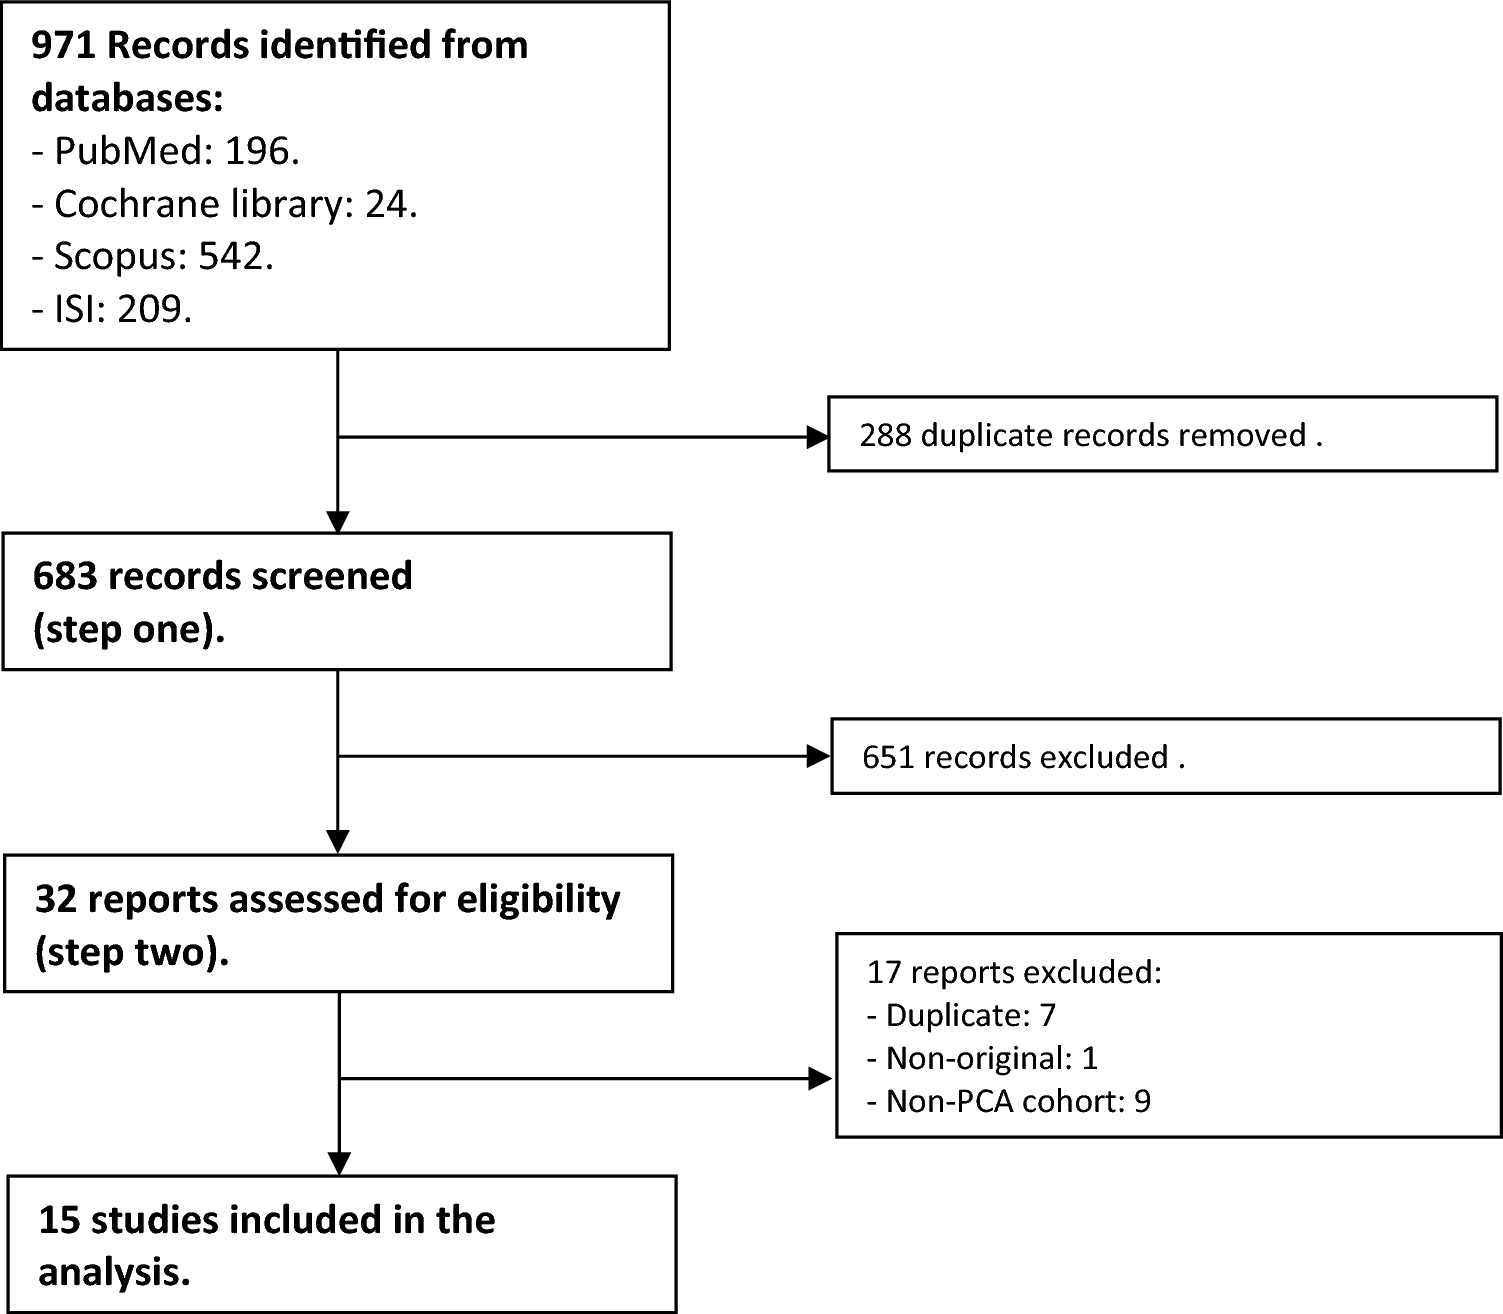 Endovascular therapy for posterior cerebral artery occlusion: systematic review with meta-analysis